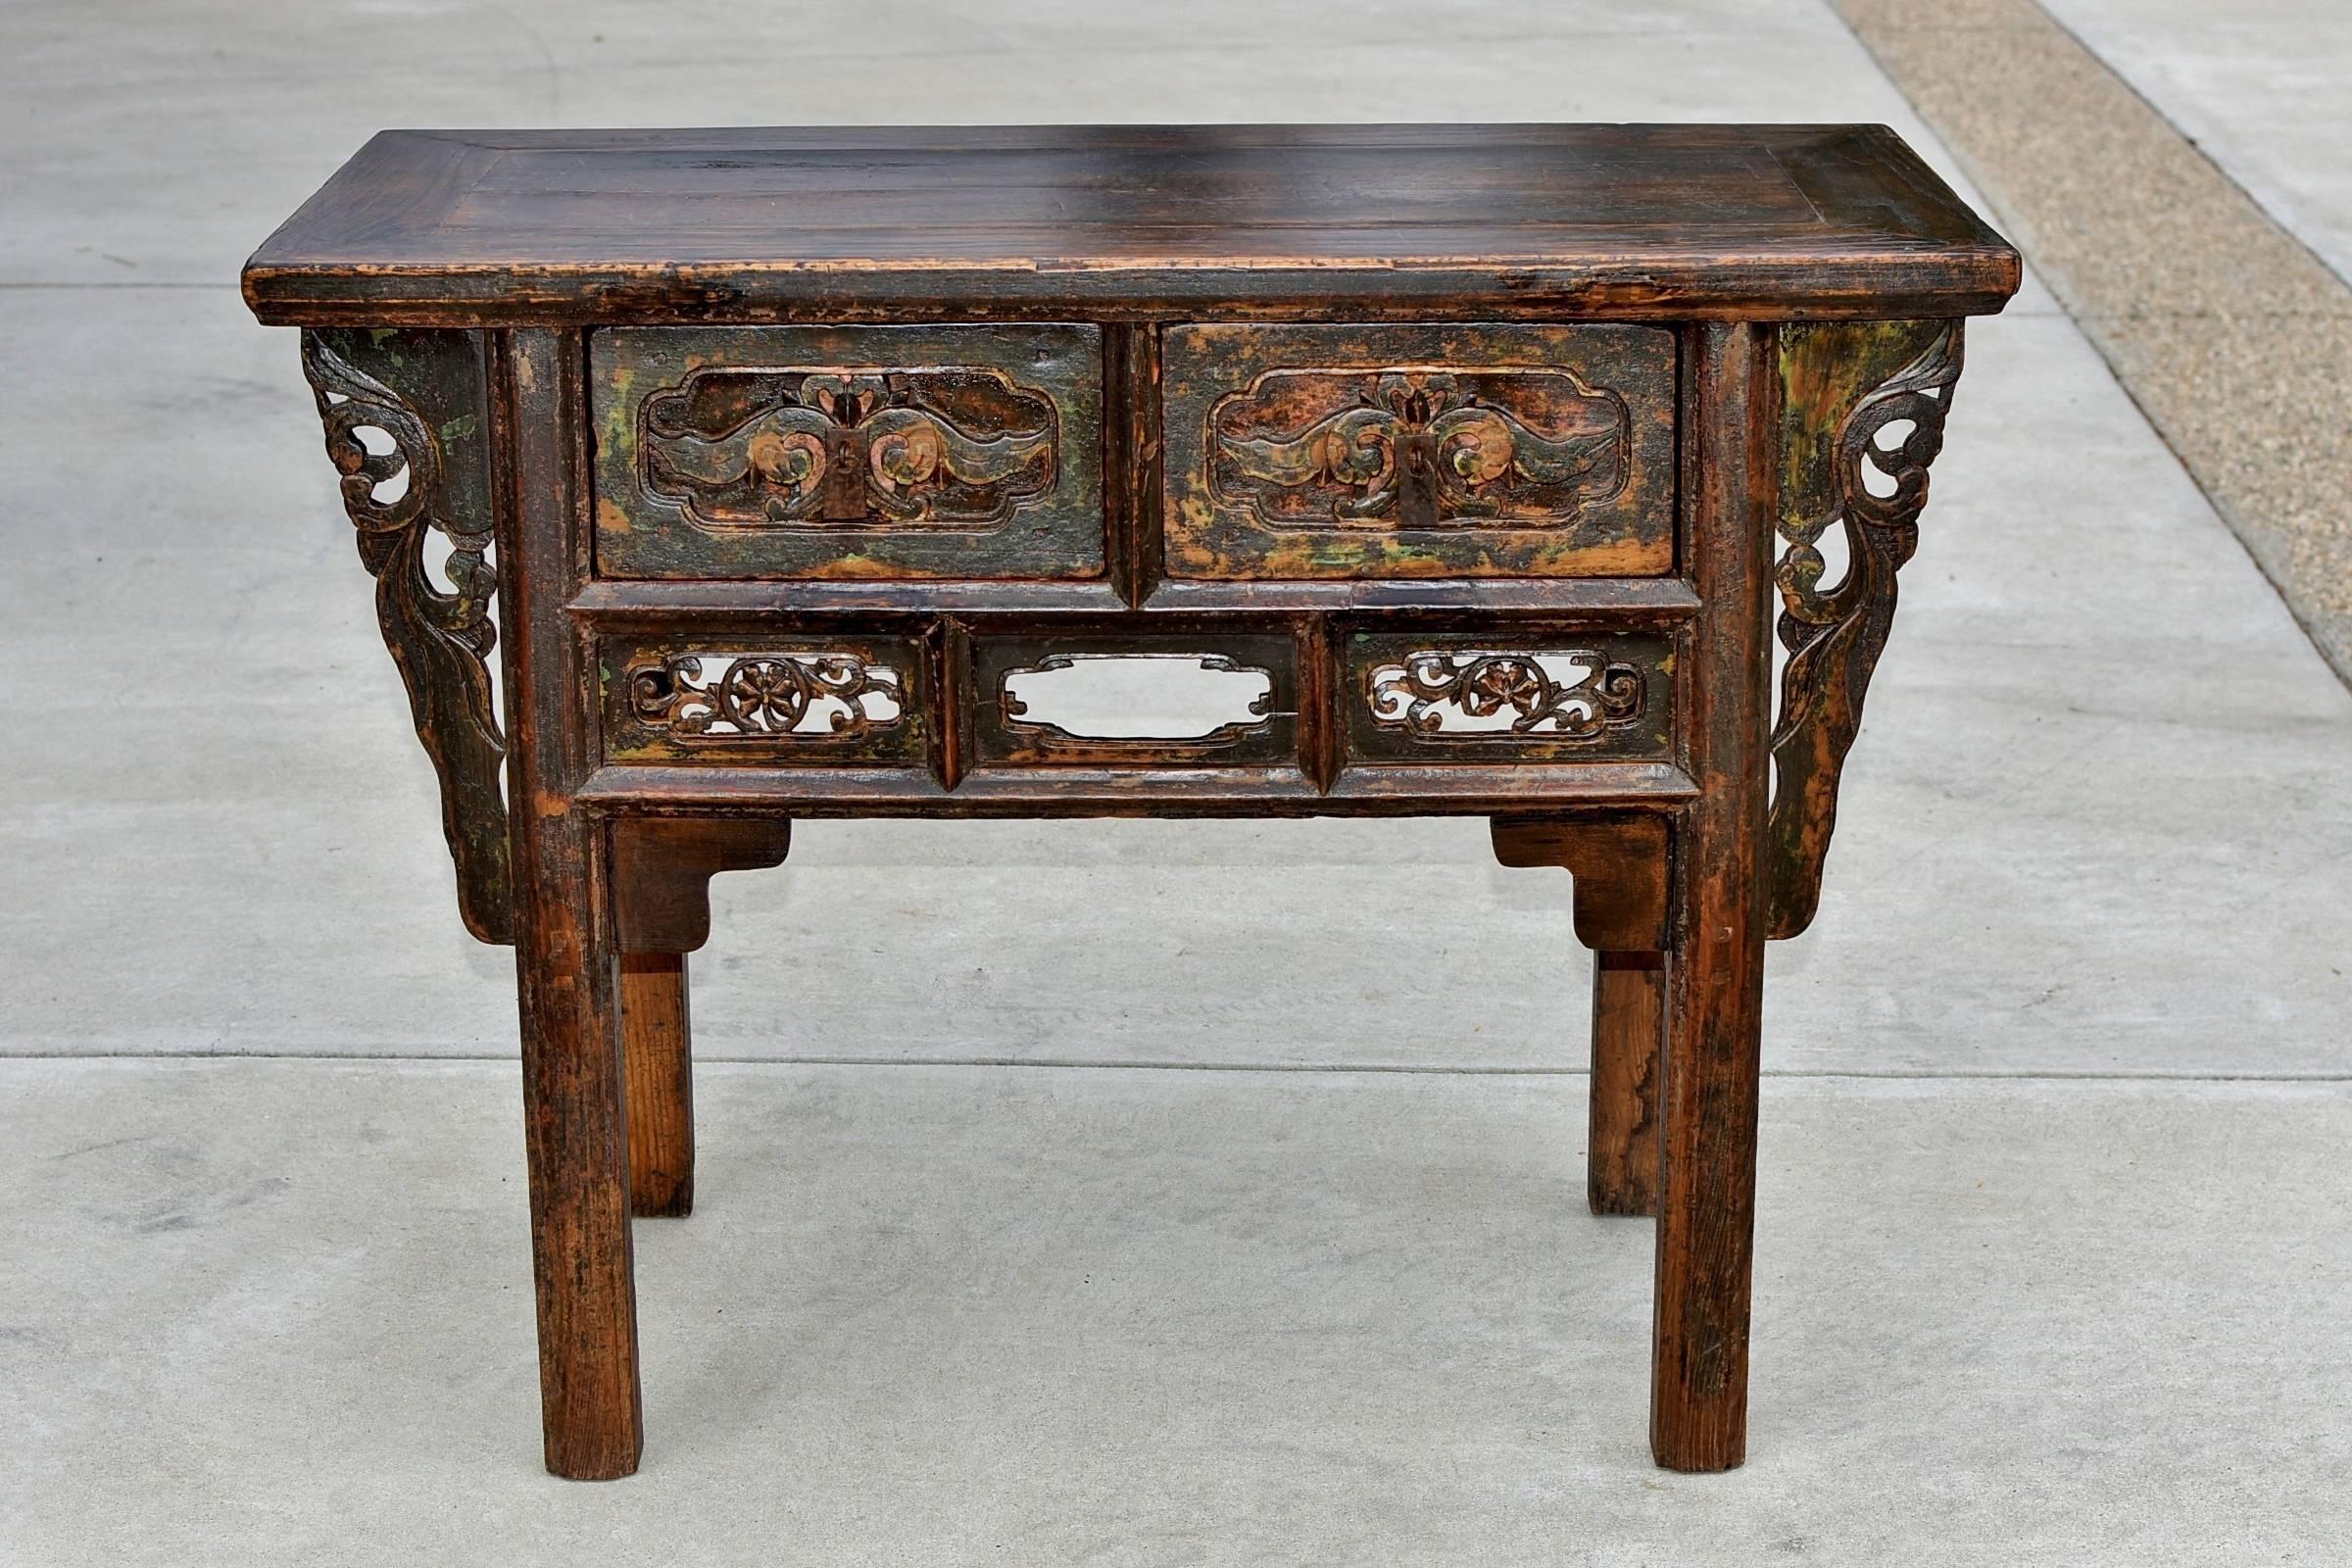 A beautiful antique table that is the perfect scale. It is carved with northern style peonies and scrolls. The chunkiness of the flowers on the drawer front contrasts nicely with the delicateness of the scrolls underneath. More scroll works are seen